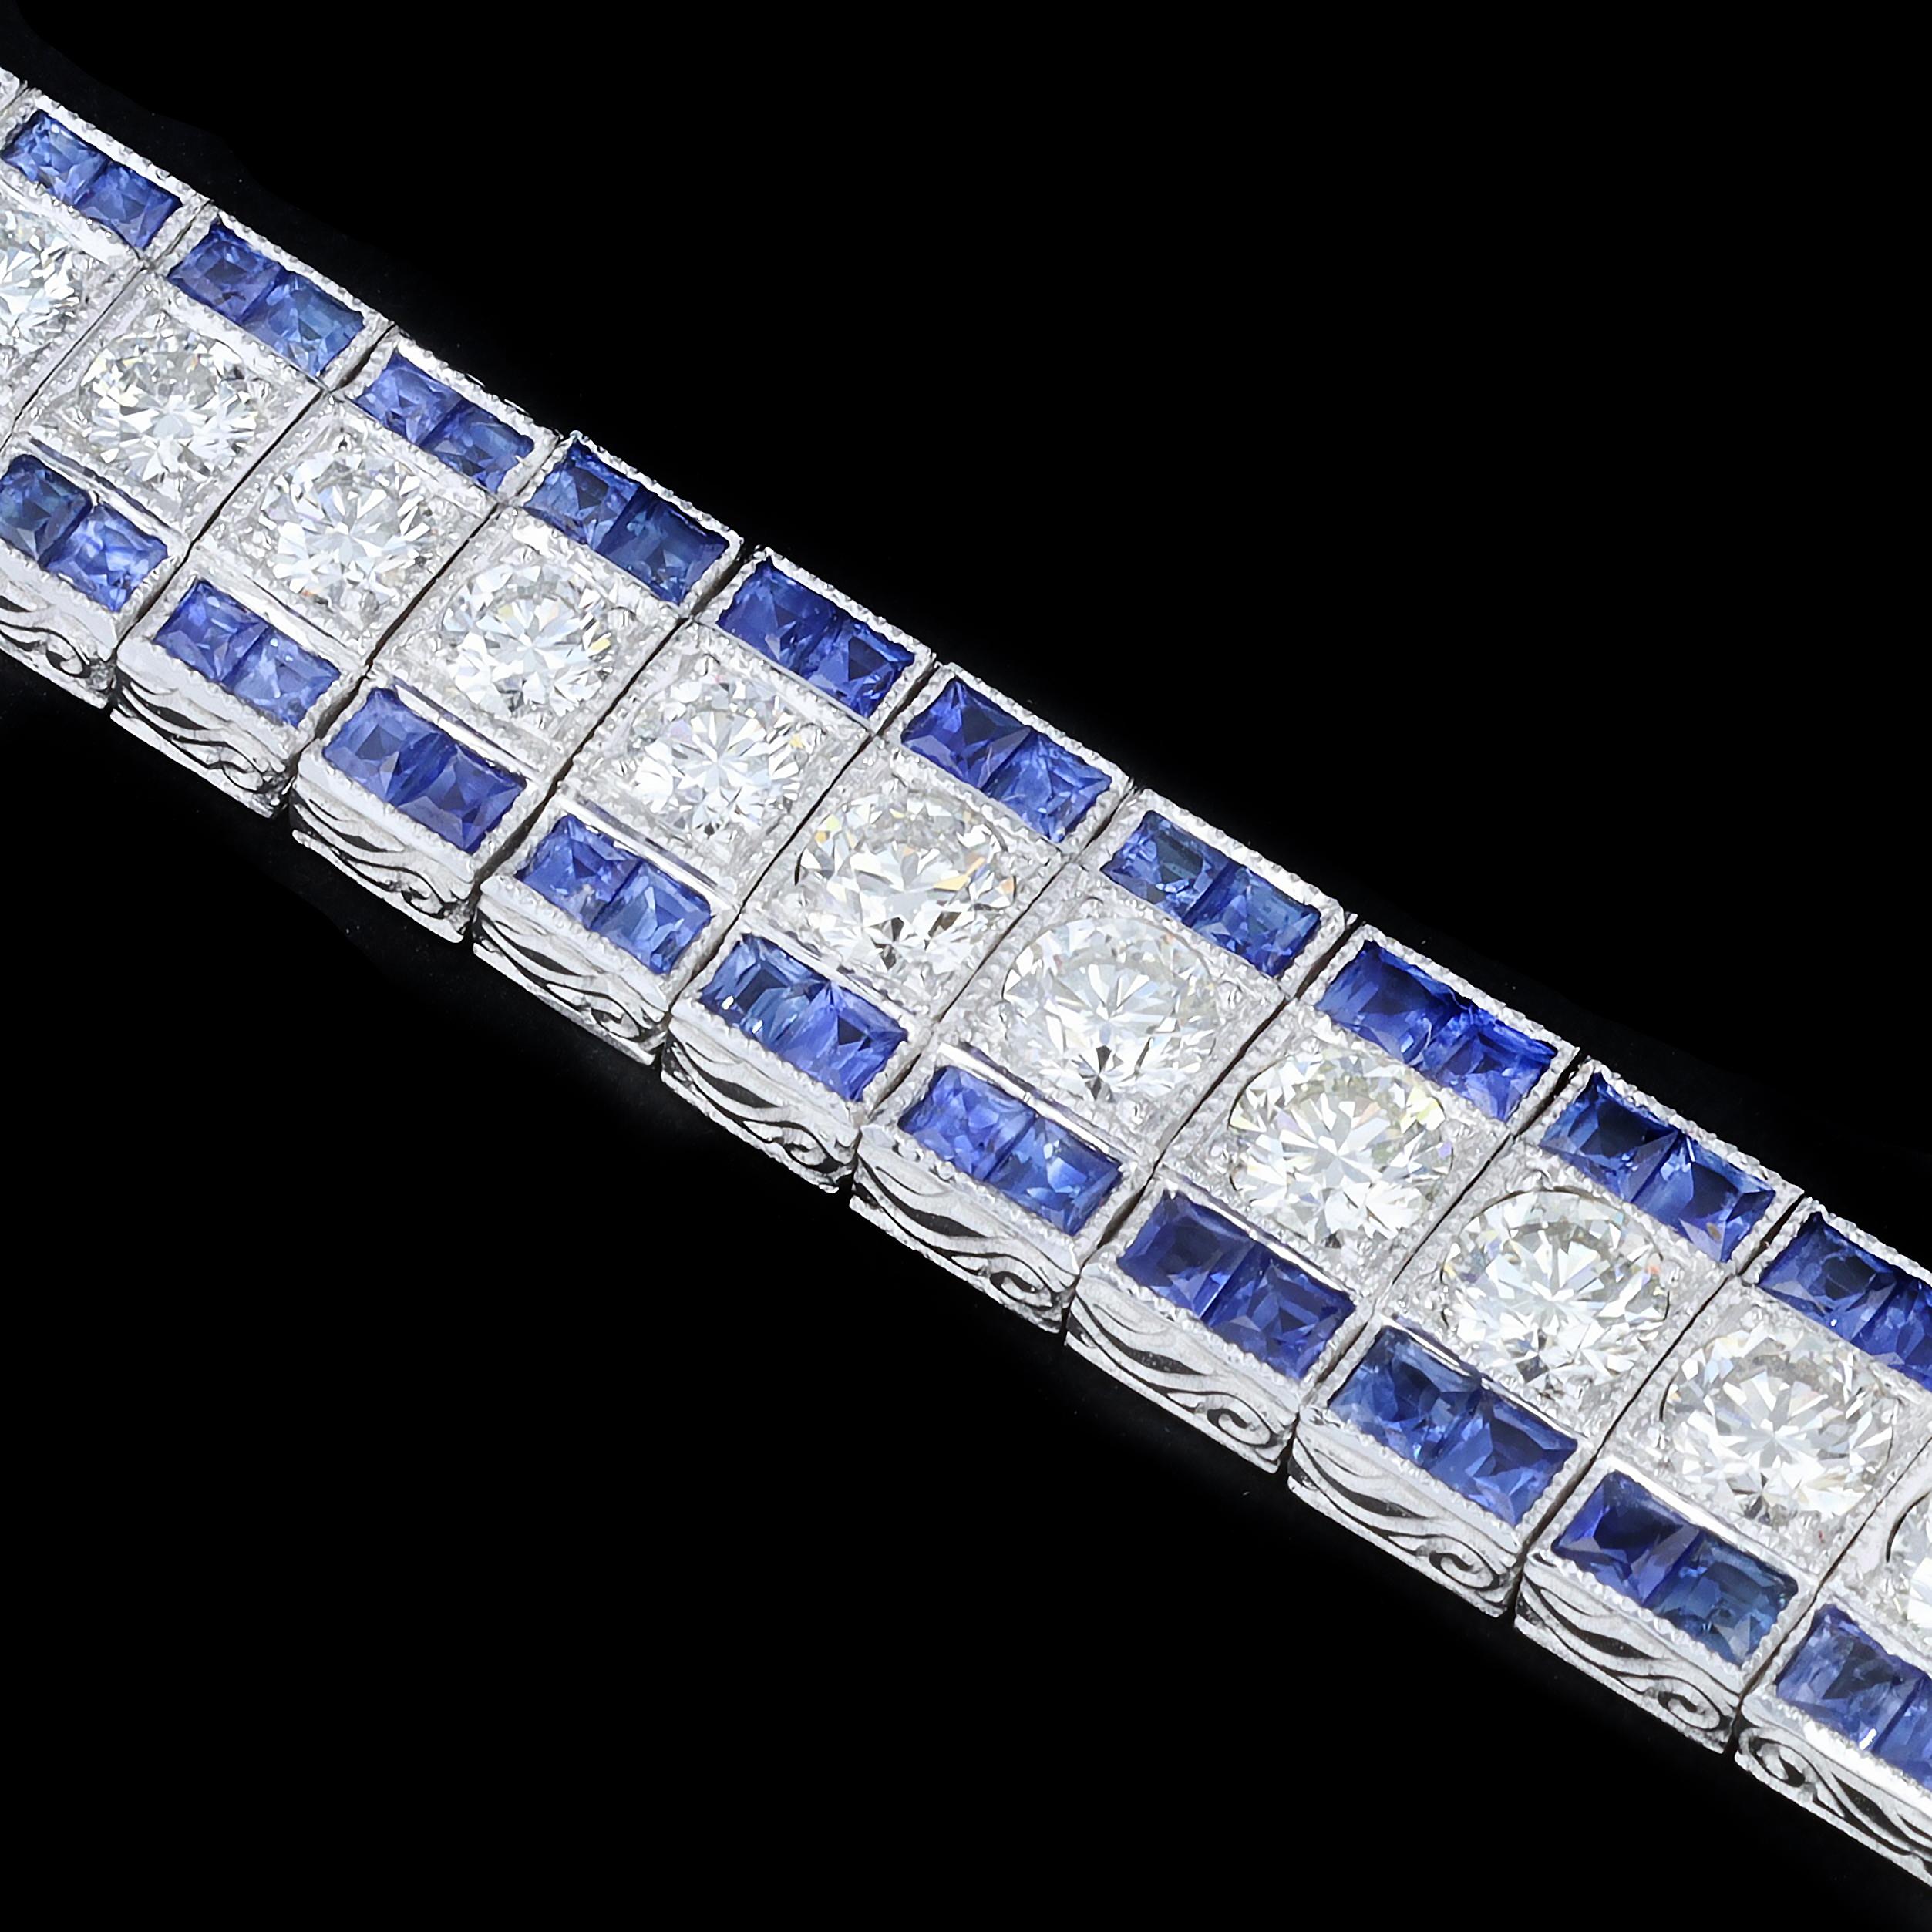 Symmetry and style make this sapphire and diamond 18K white gold estate bracelet a timeless treasure. This sparkling bracelet features 6.44ct of round cut diamond with 6.99ct square cut sapphires. It measures 7 1/4 inches in length and weighs 31.8